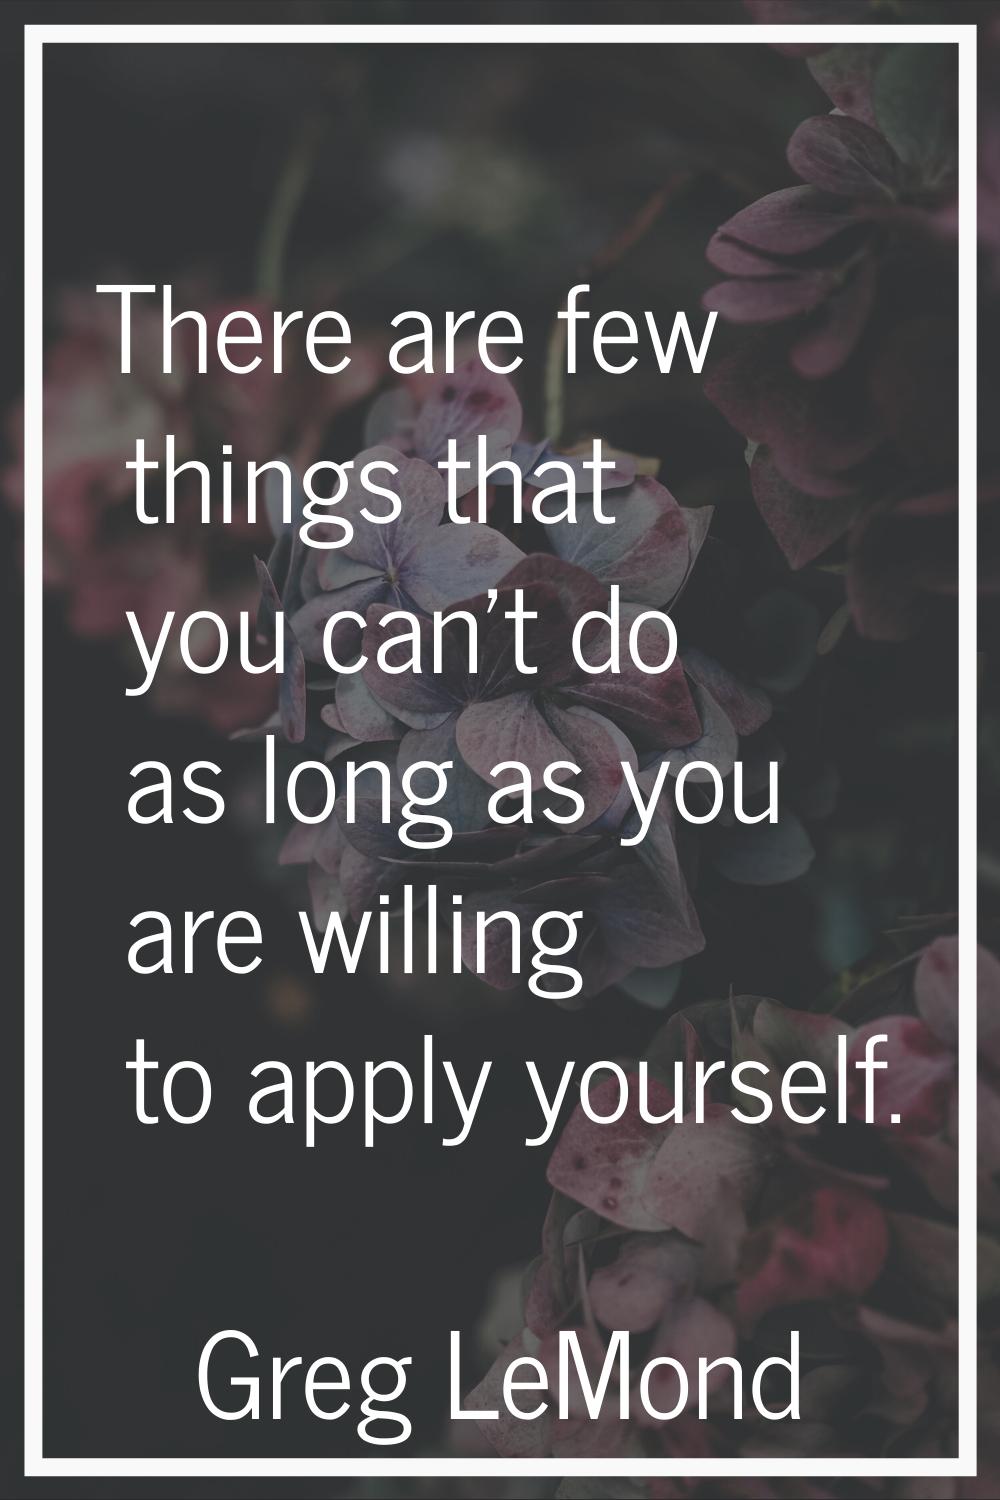 There are few things that you can't do as long as you are willing to apply yourself.